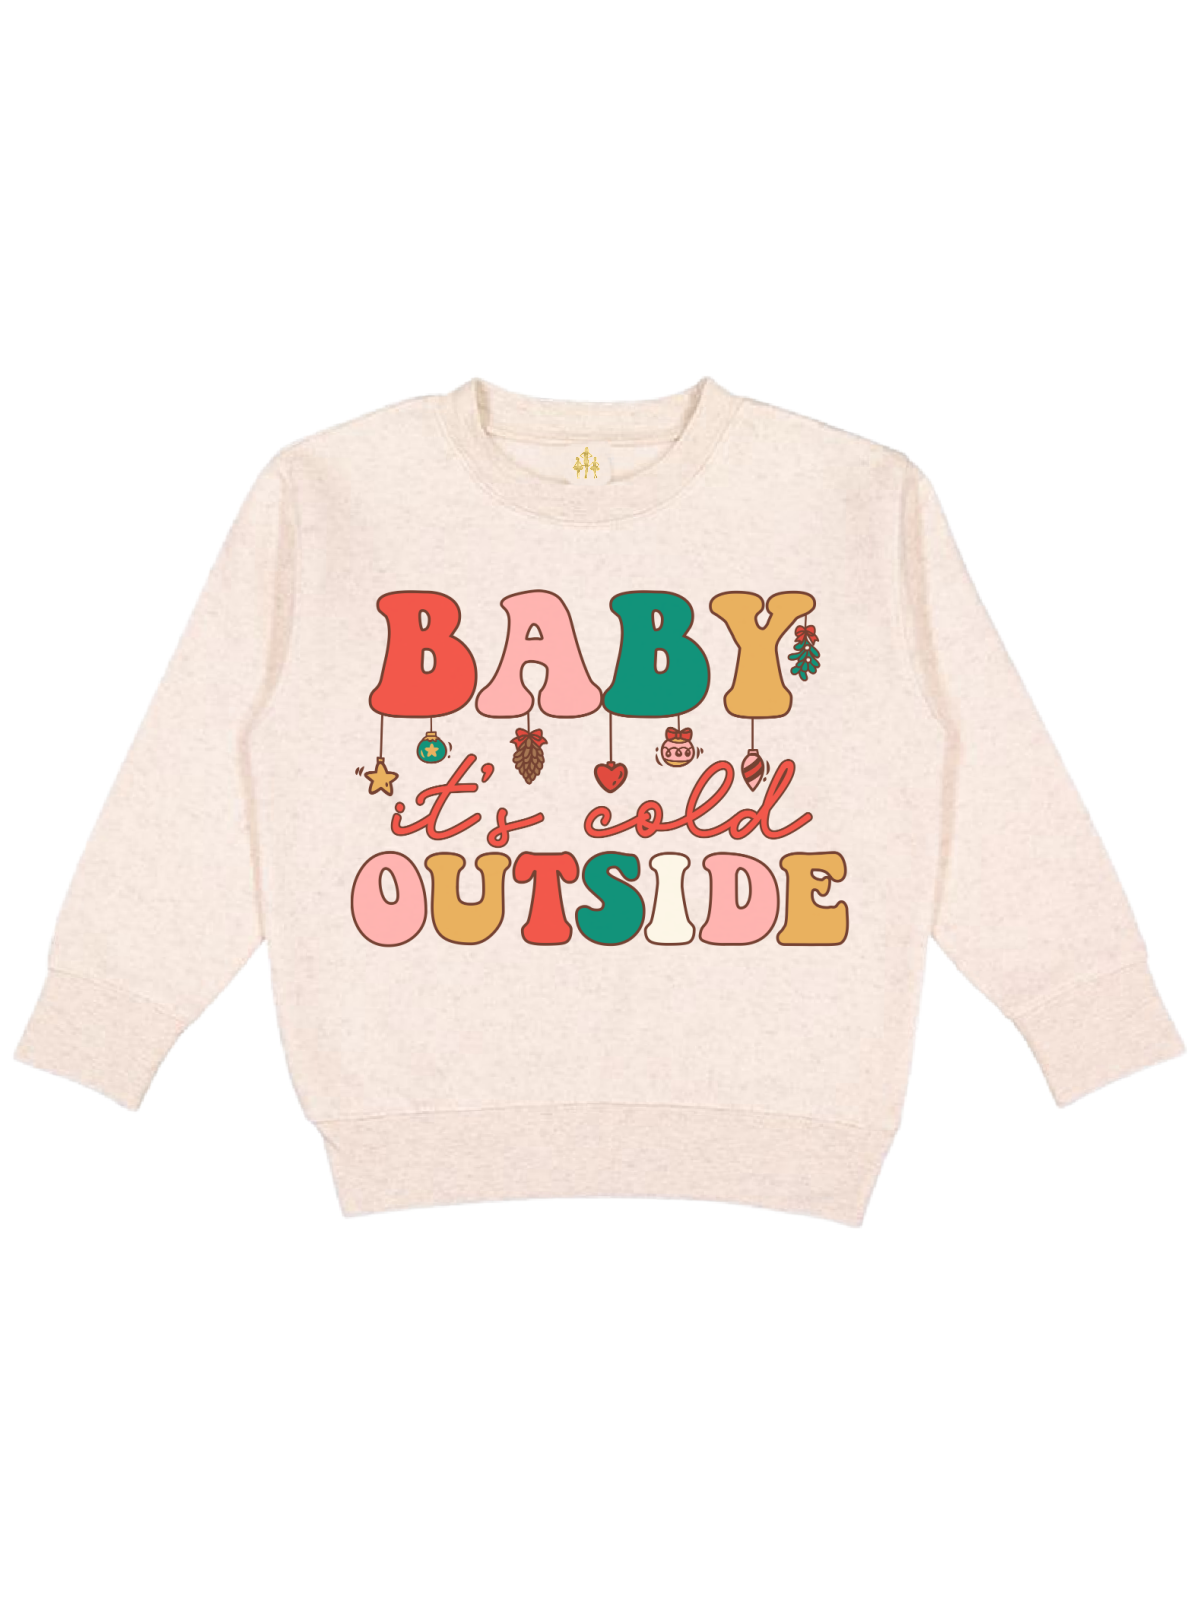 Baby It's Cold Outside Kids Holiday Sweatshirt